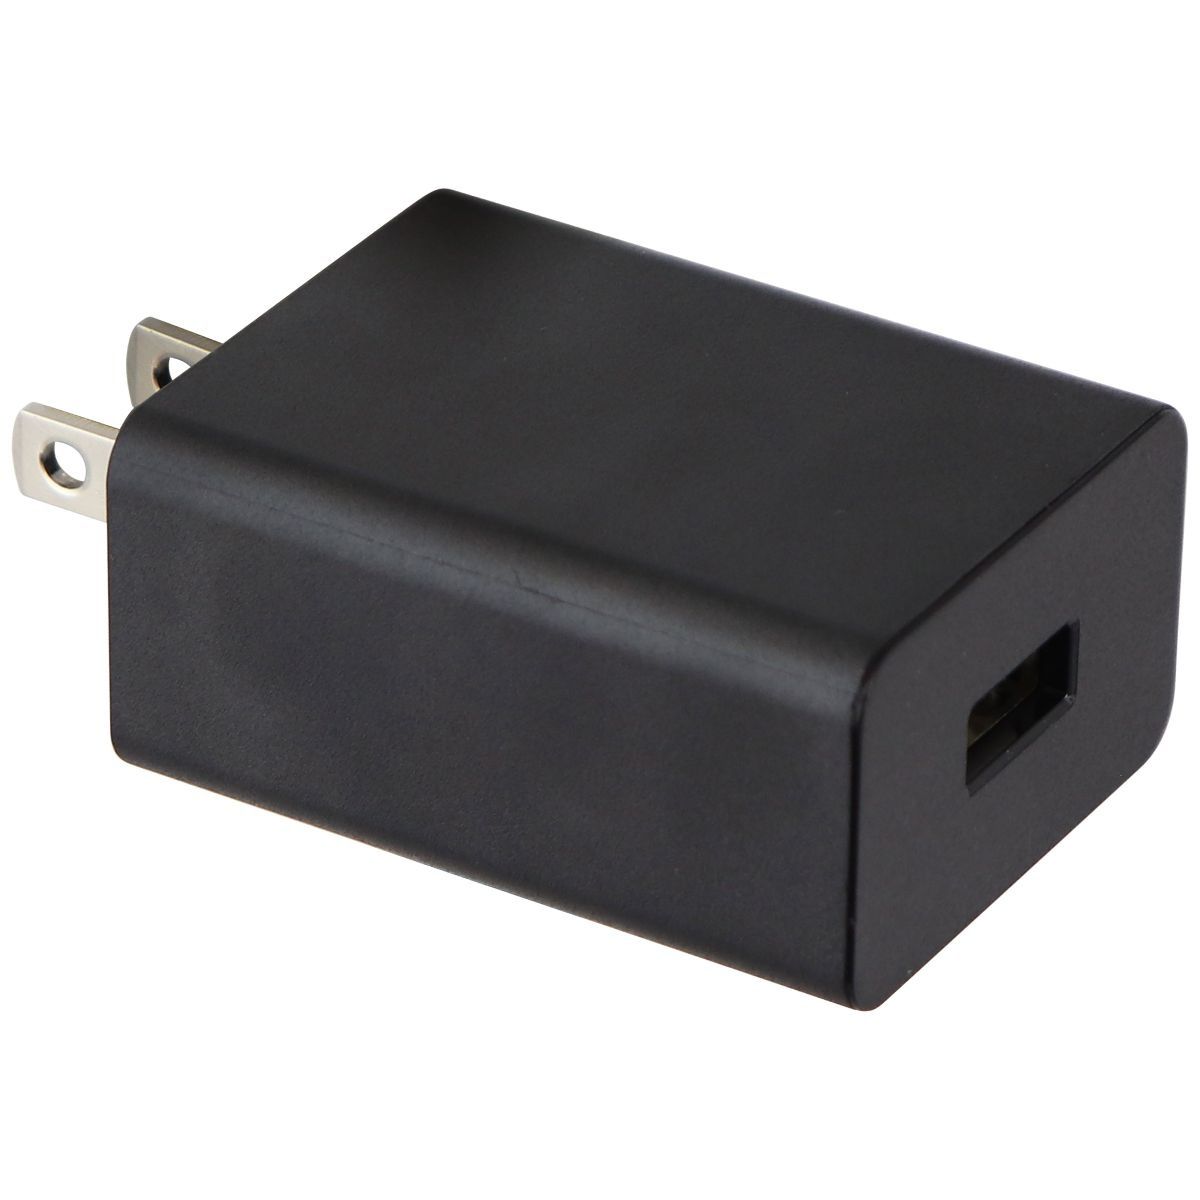 Inseego QuickCharge 3.0 Single USB Wall Charger/Adapter - Black MCUS-12015018Q1 Cell Phone - Chargers & Cradles inseego    - Simple Cell Bulk Wholesale Pricing - USA Seller